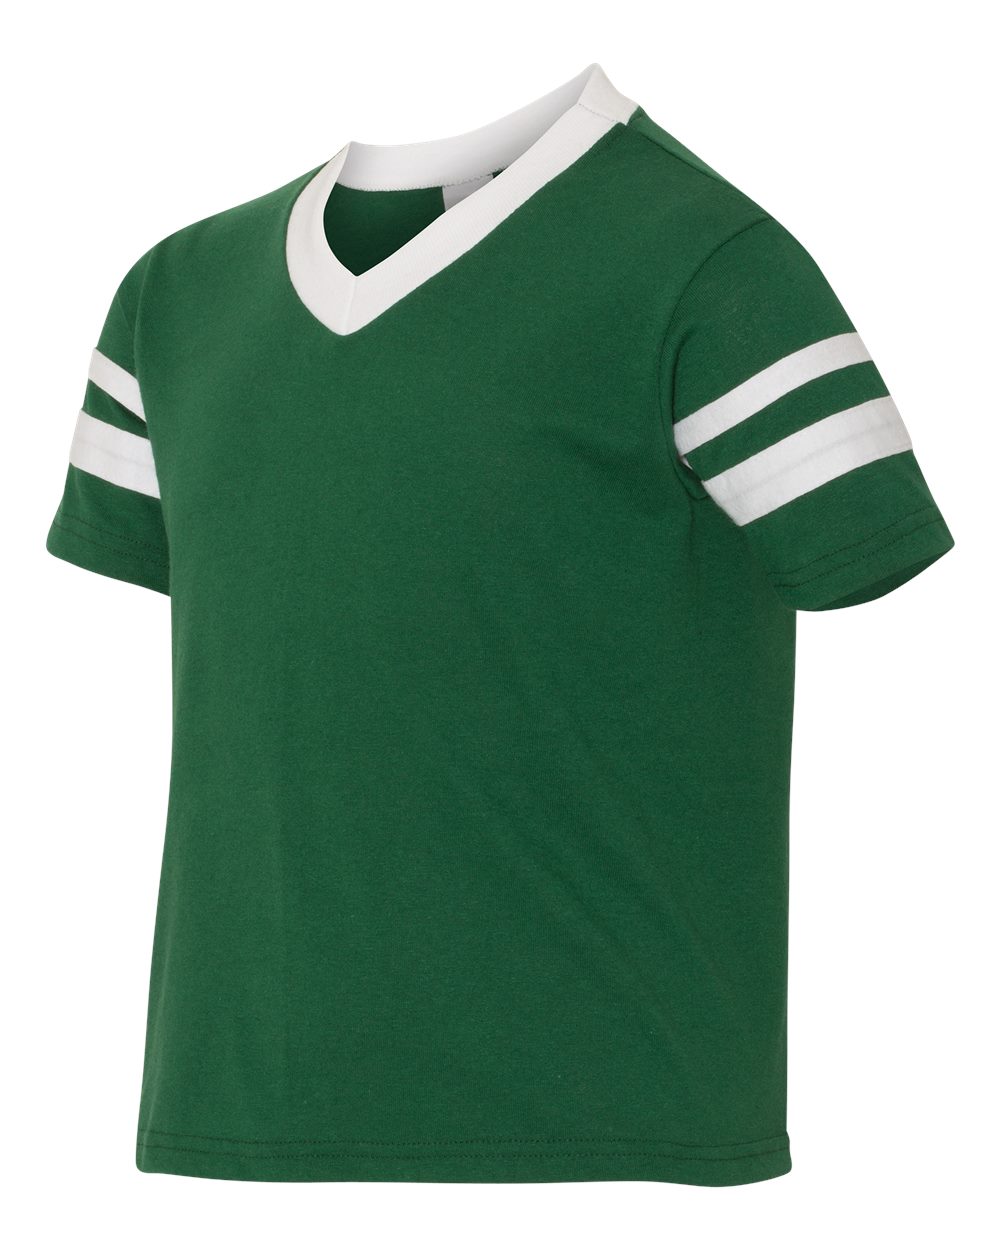 Augusta Sportswear 361 - Youth V-Neck Jersey with Striped Sleeves